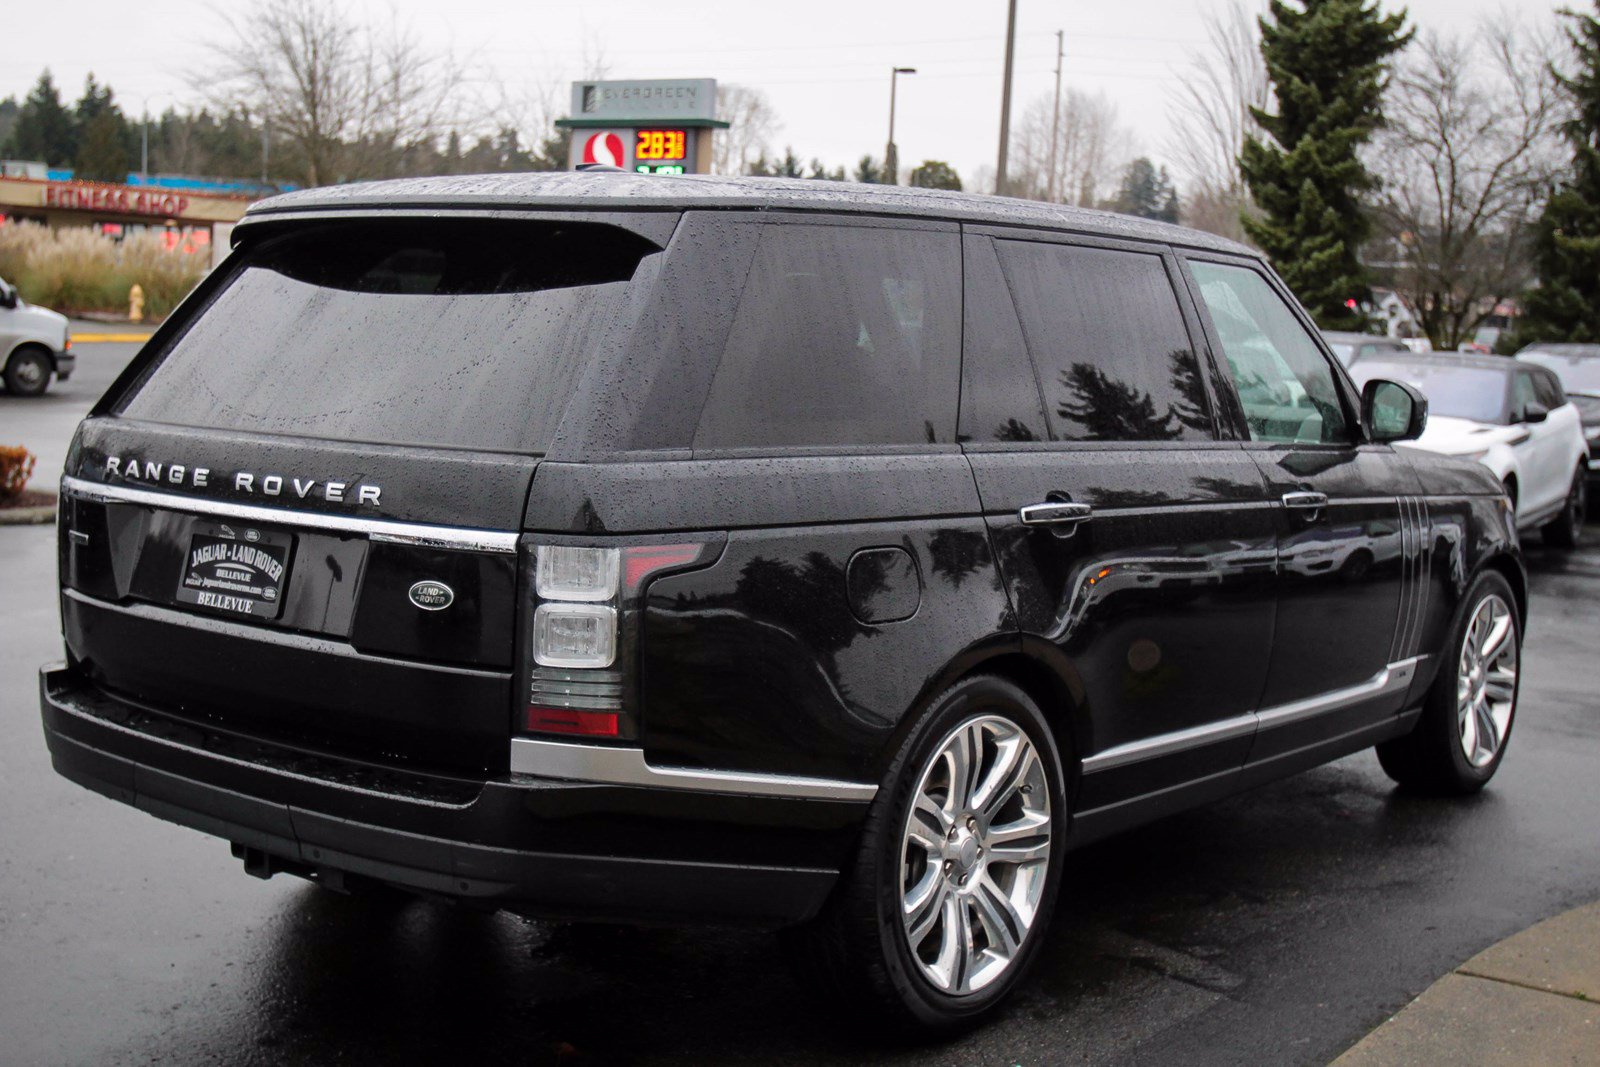 Pre-Owned 2015 Land Rover Range Rover Autobiography Black Sport Utility ...